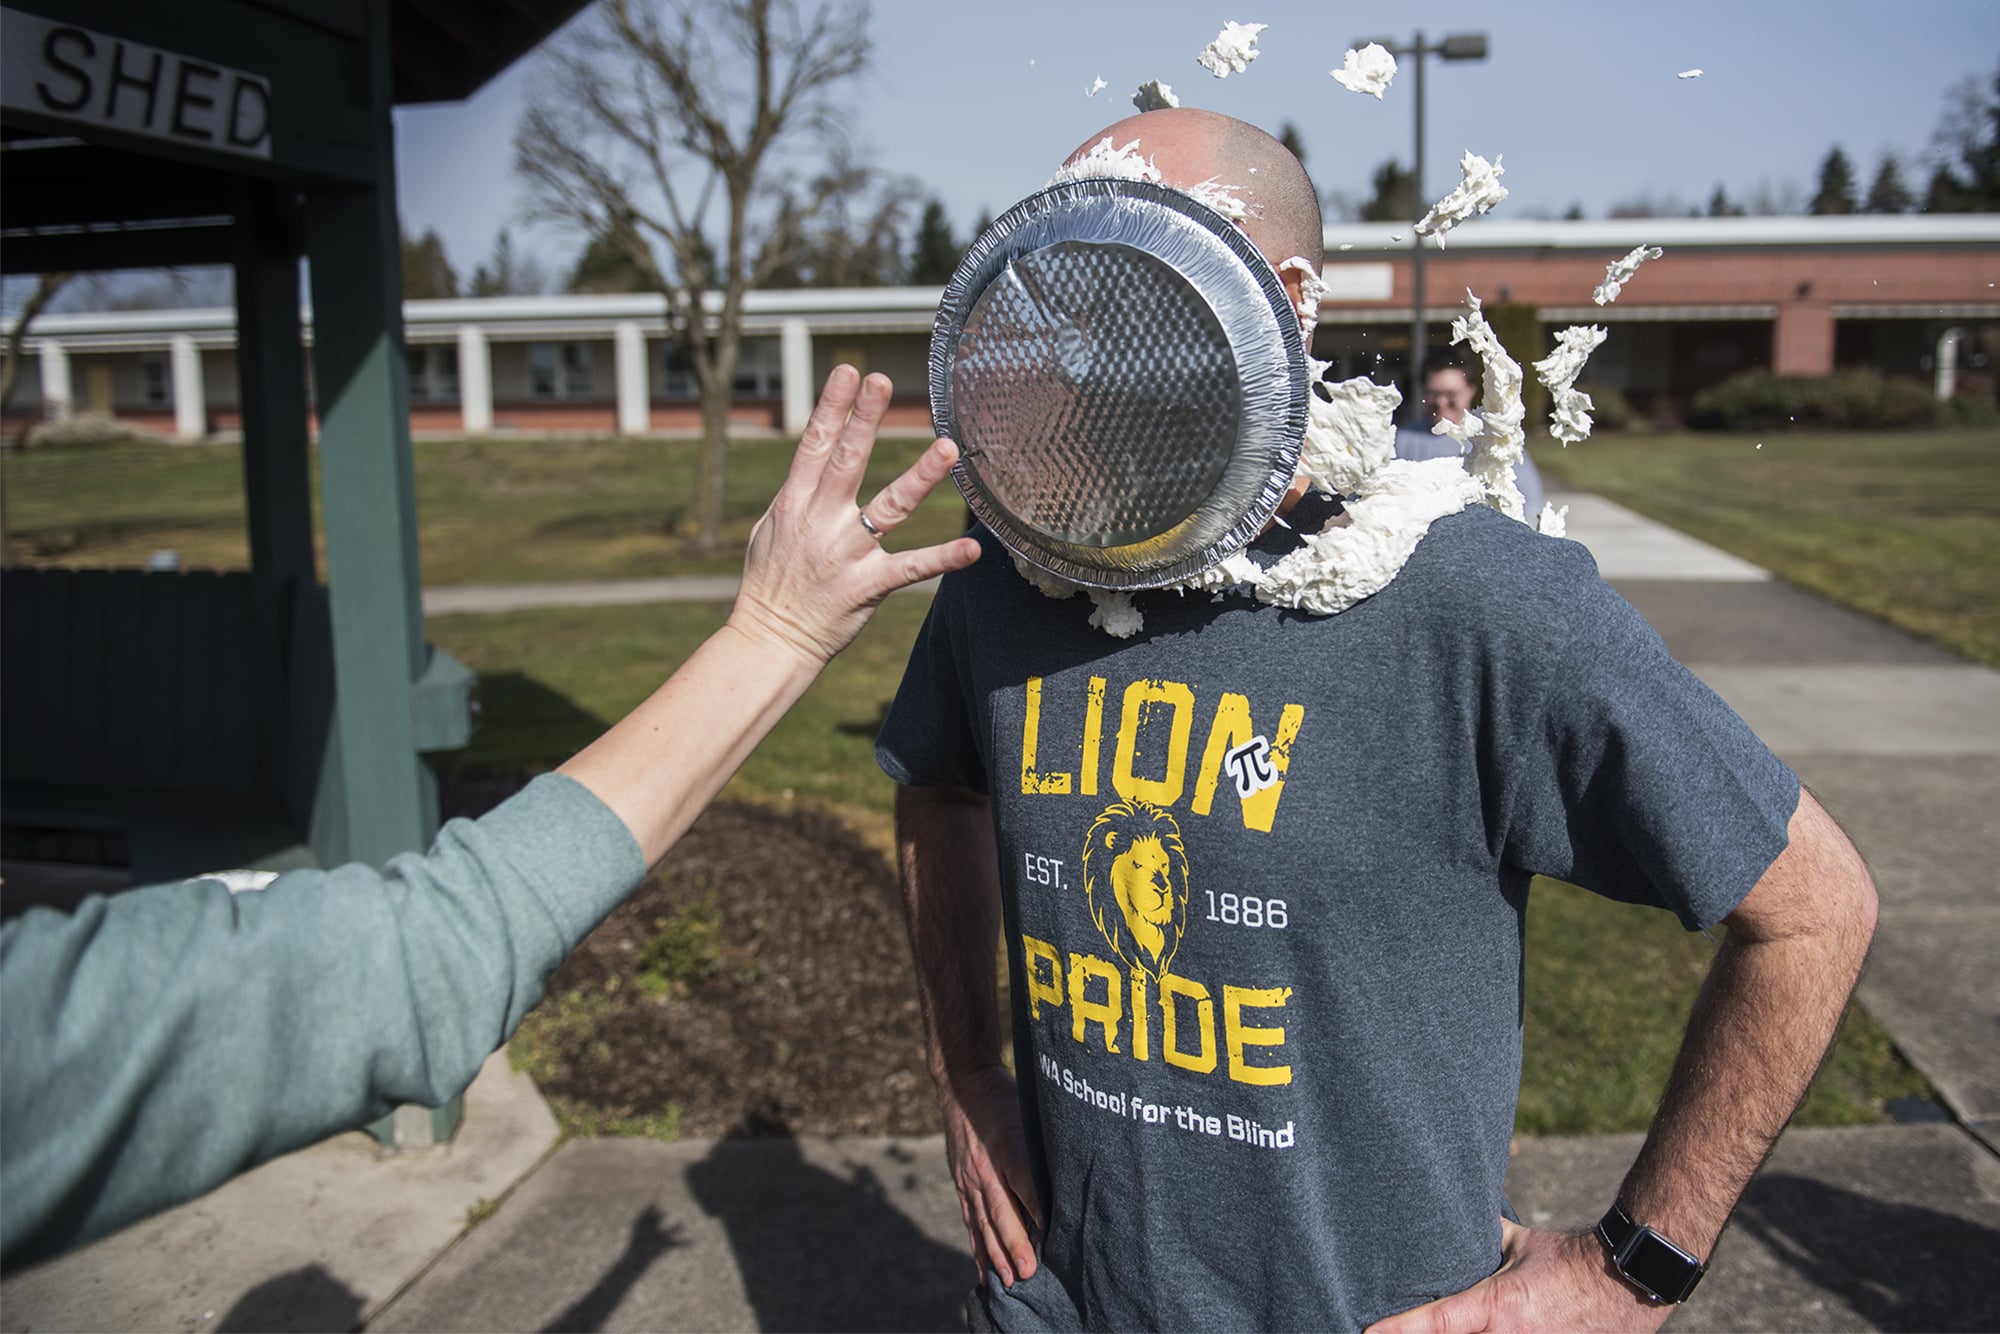 Scott McCallum, superintendent of the Washington State School for the Blind, takes a pie to the face as a reward for students who memorized 50 digits of Pi at the Washington State School for the Blind on Thursday afternoon, March 14, 2019.